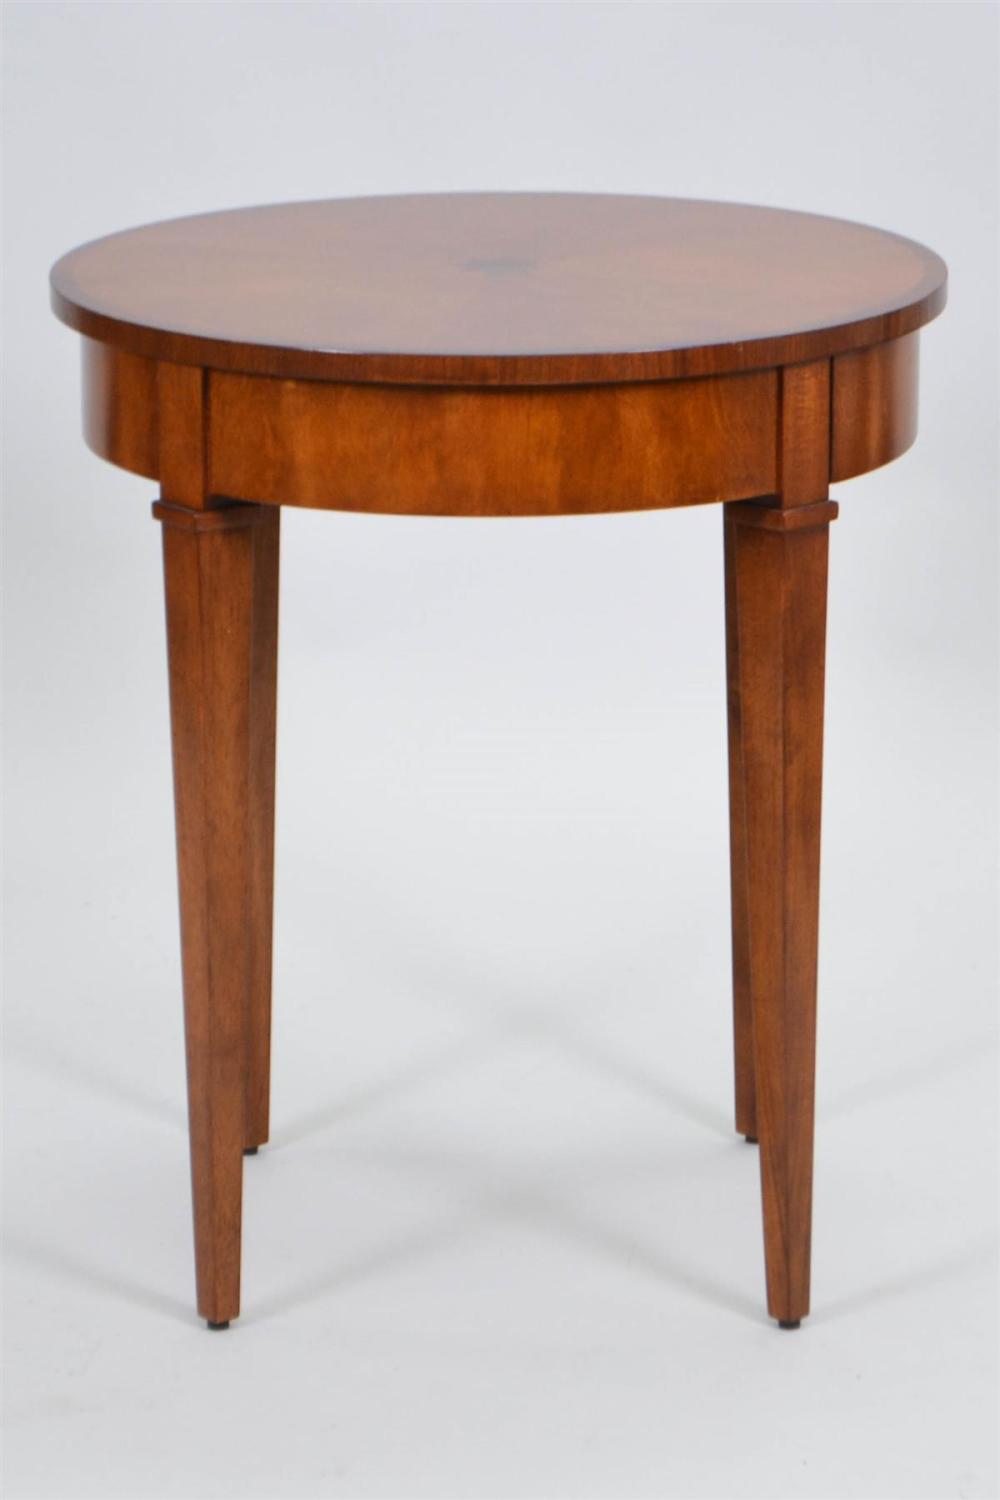 NEOCLASSICAL STYLE INLAID FRUITWOOD